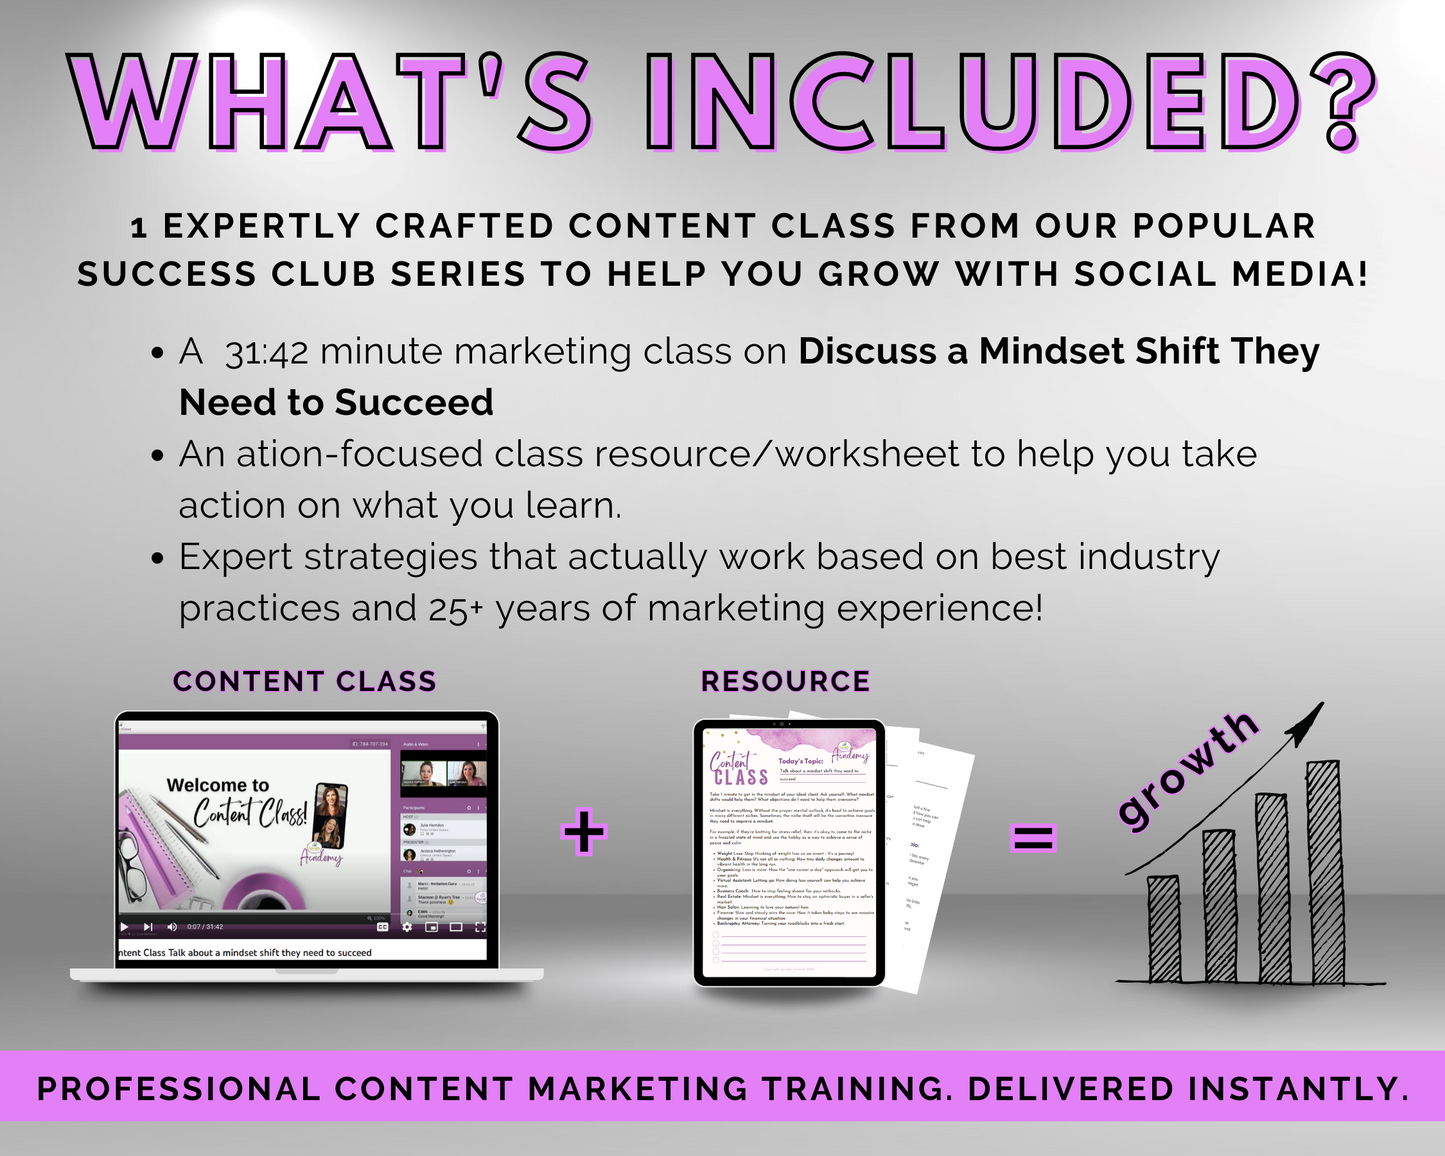 Content Class - Discuss a Mindset Shift They Need to Succeed Masterclass